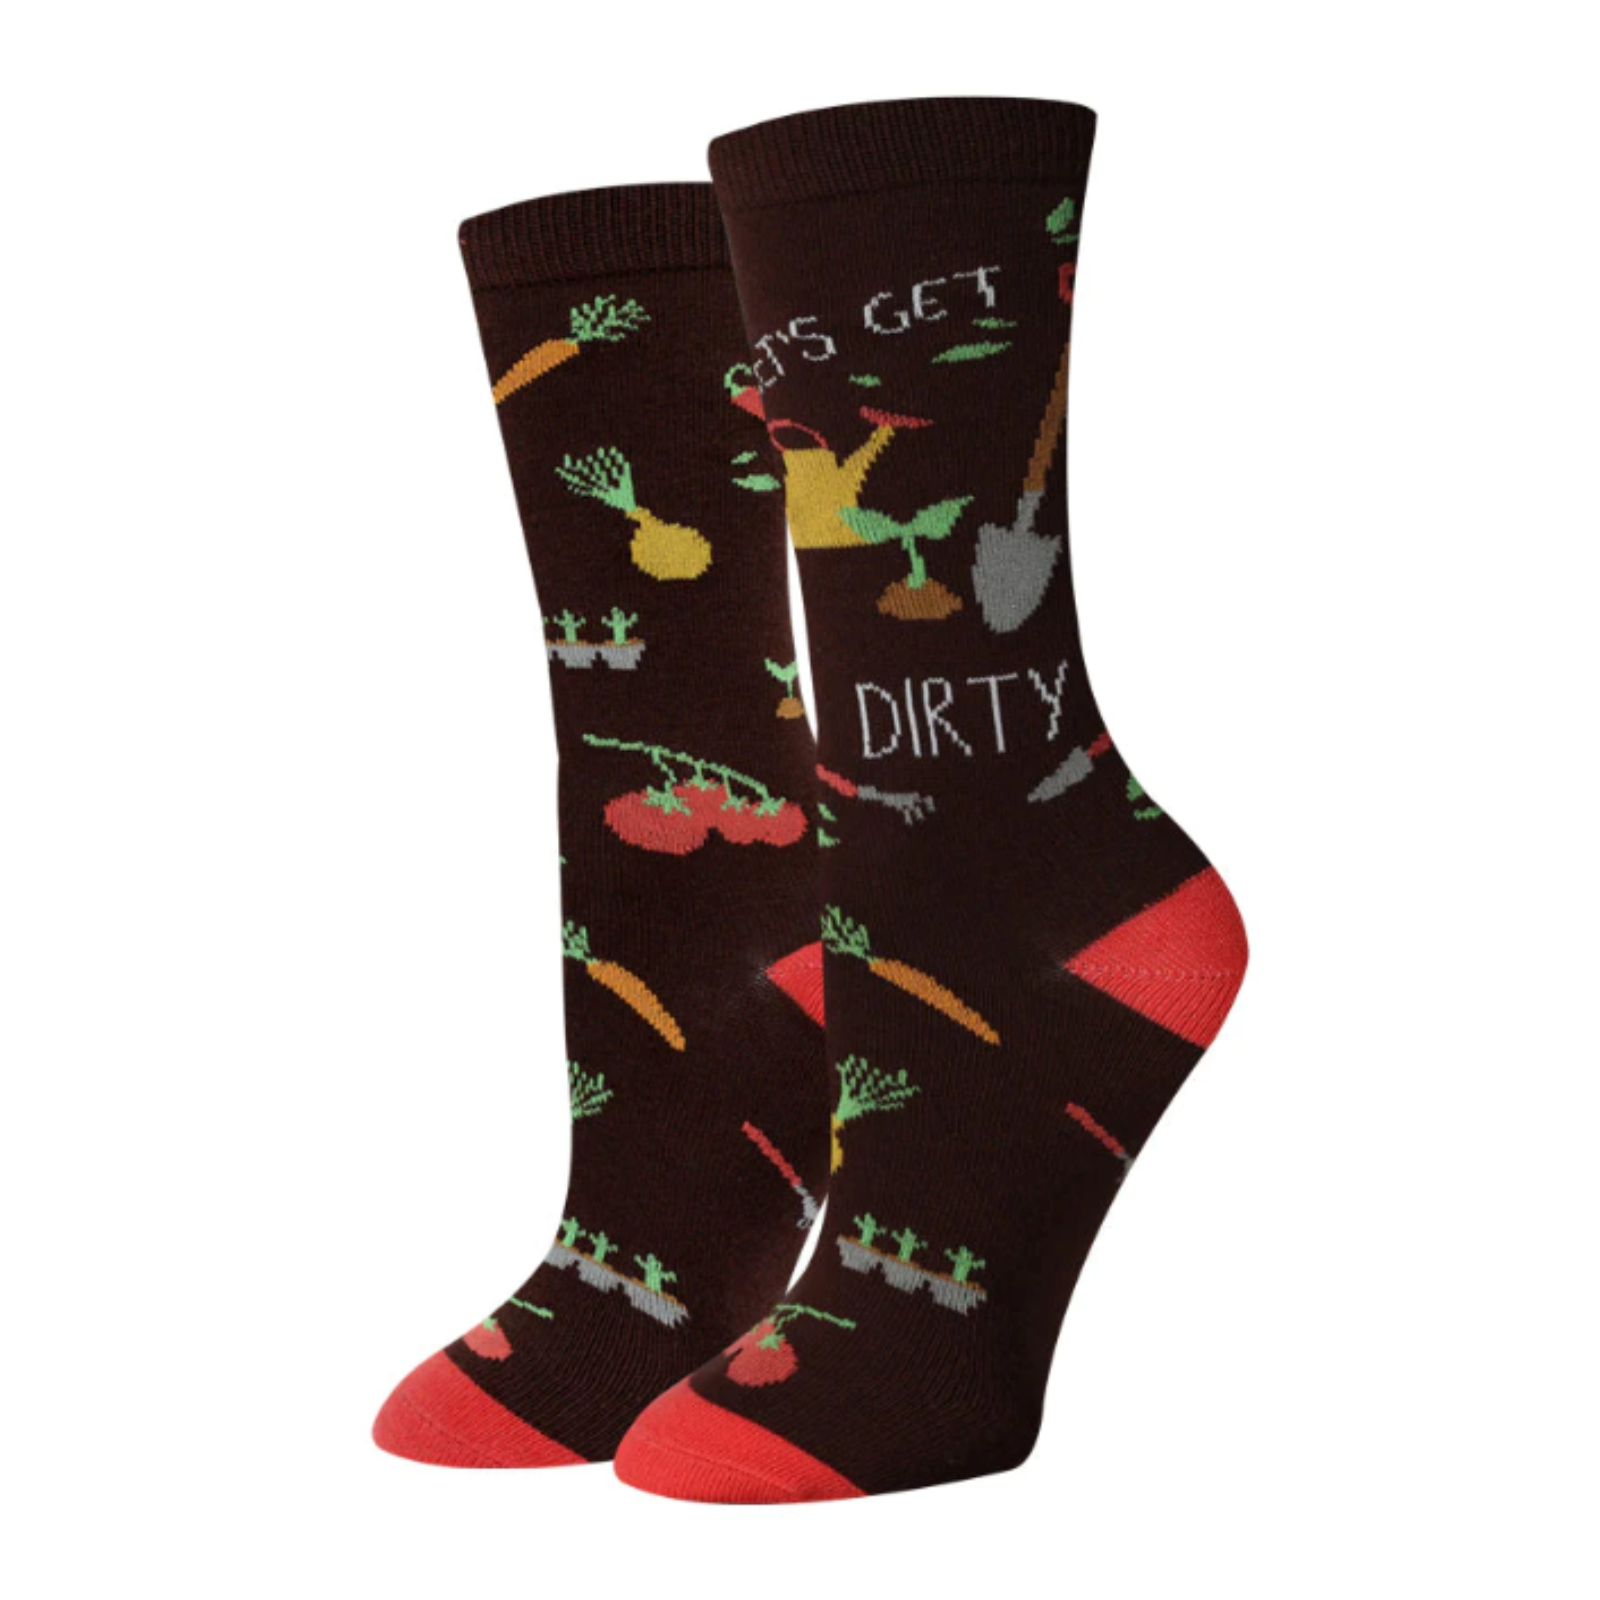 Sock Harbor women's sock that says Let's Get Dirty with pictures of plants and gardening tools